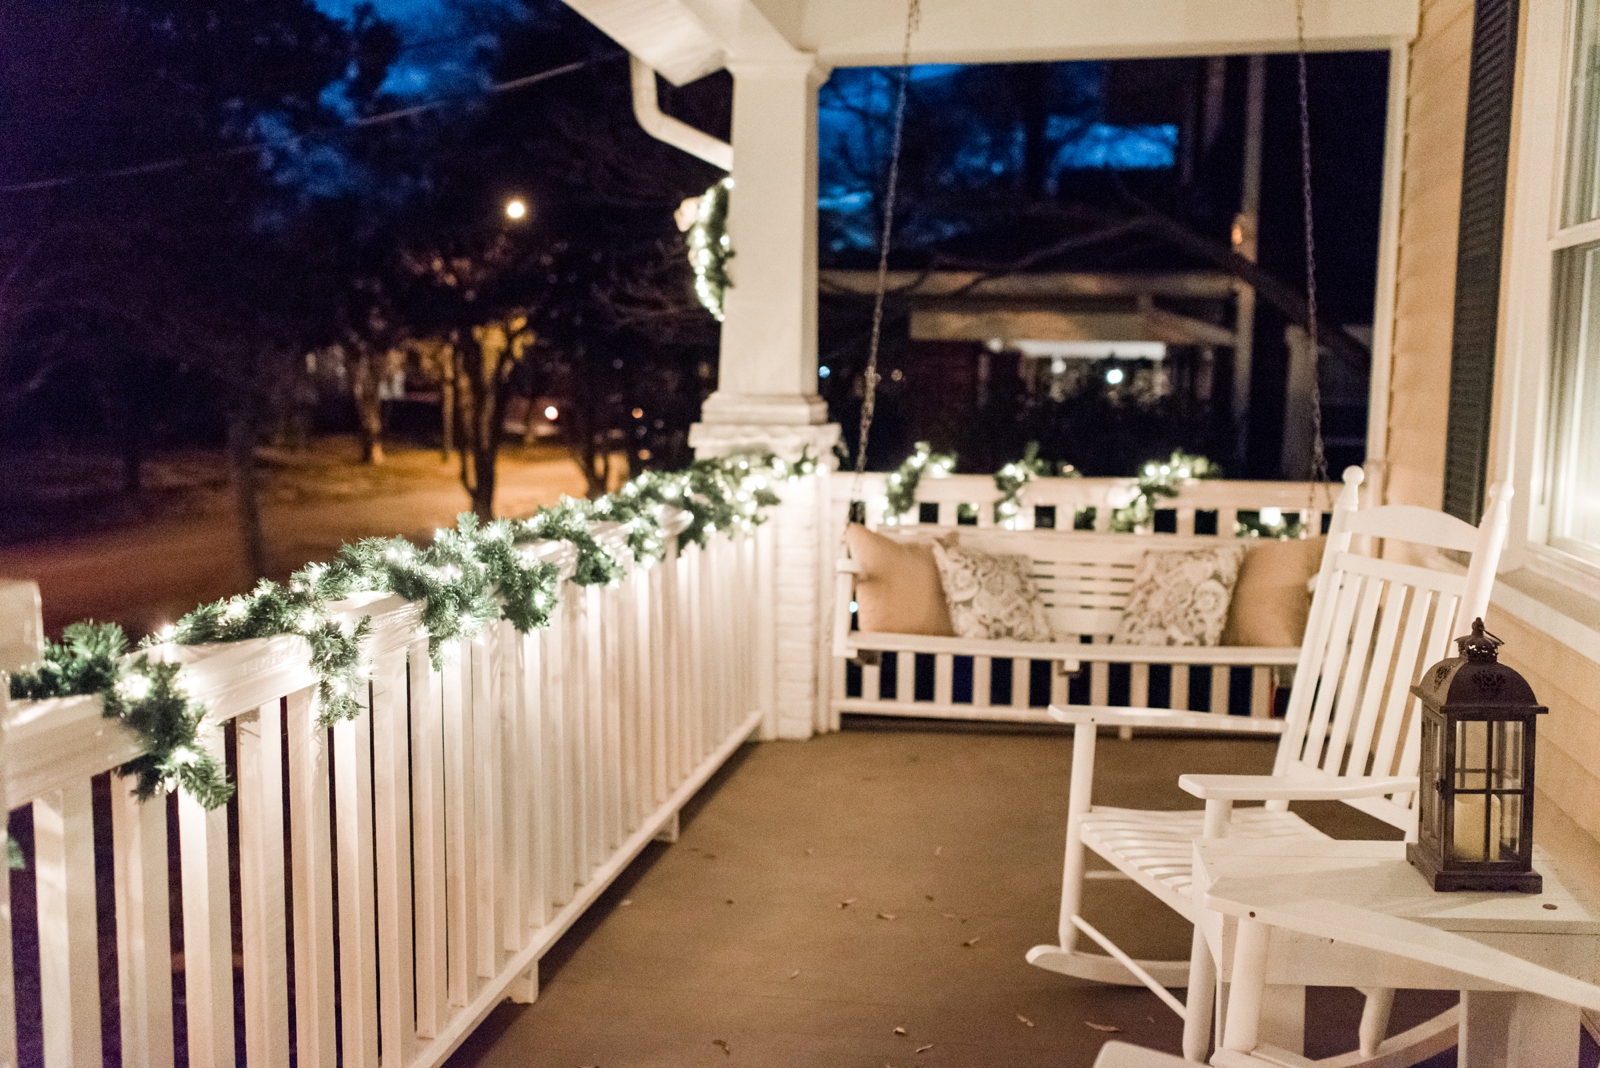 southern neutral christmas decor in old craftsman home norfolk virginia